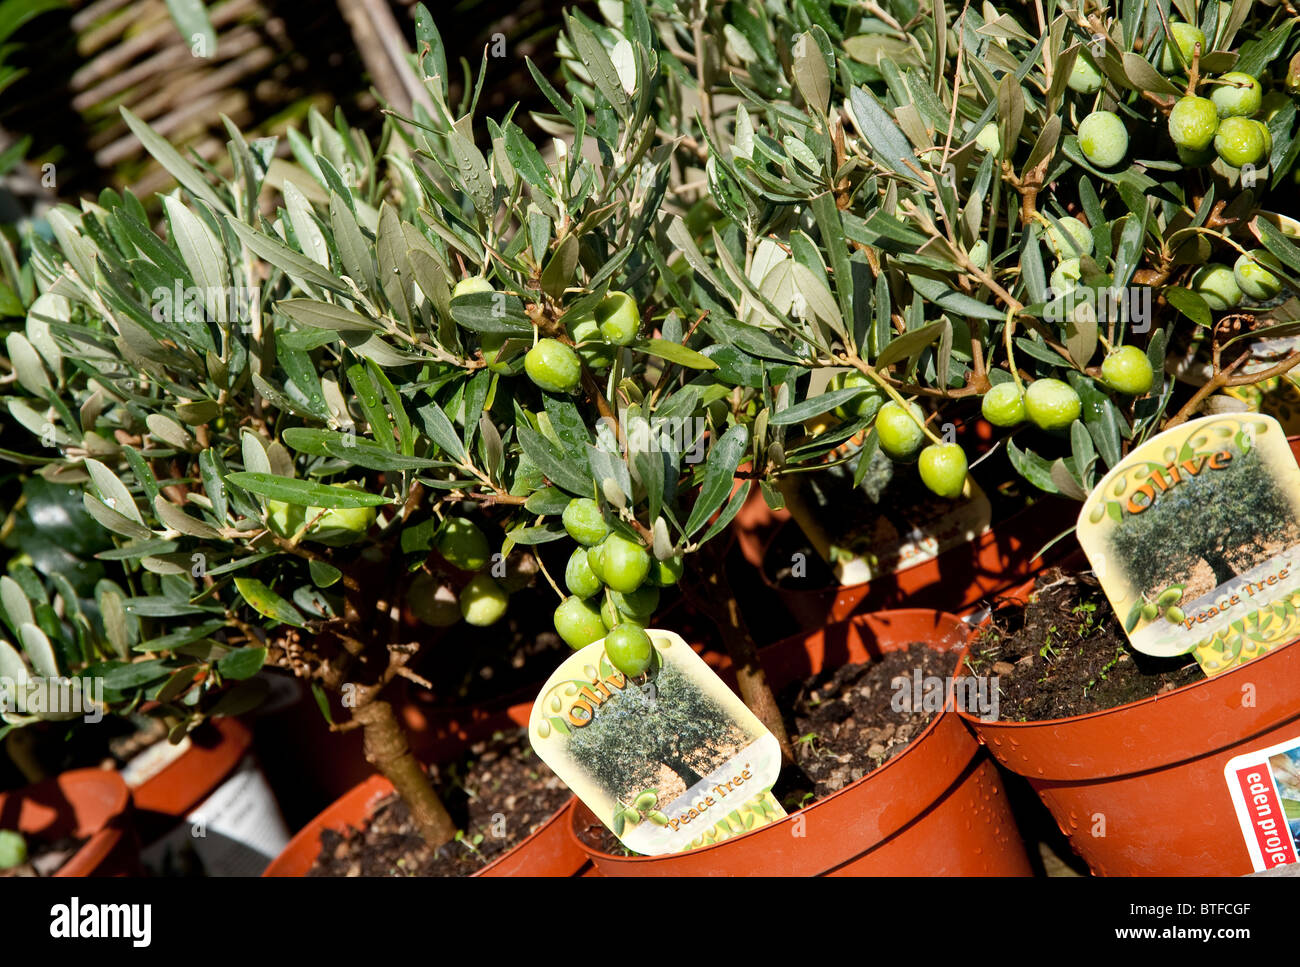 Olive plants in the Eden Project, St Austell, Cornwall, UK Stock Photo